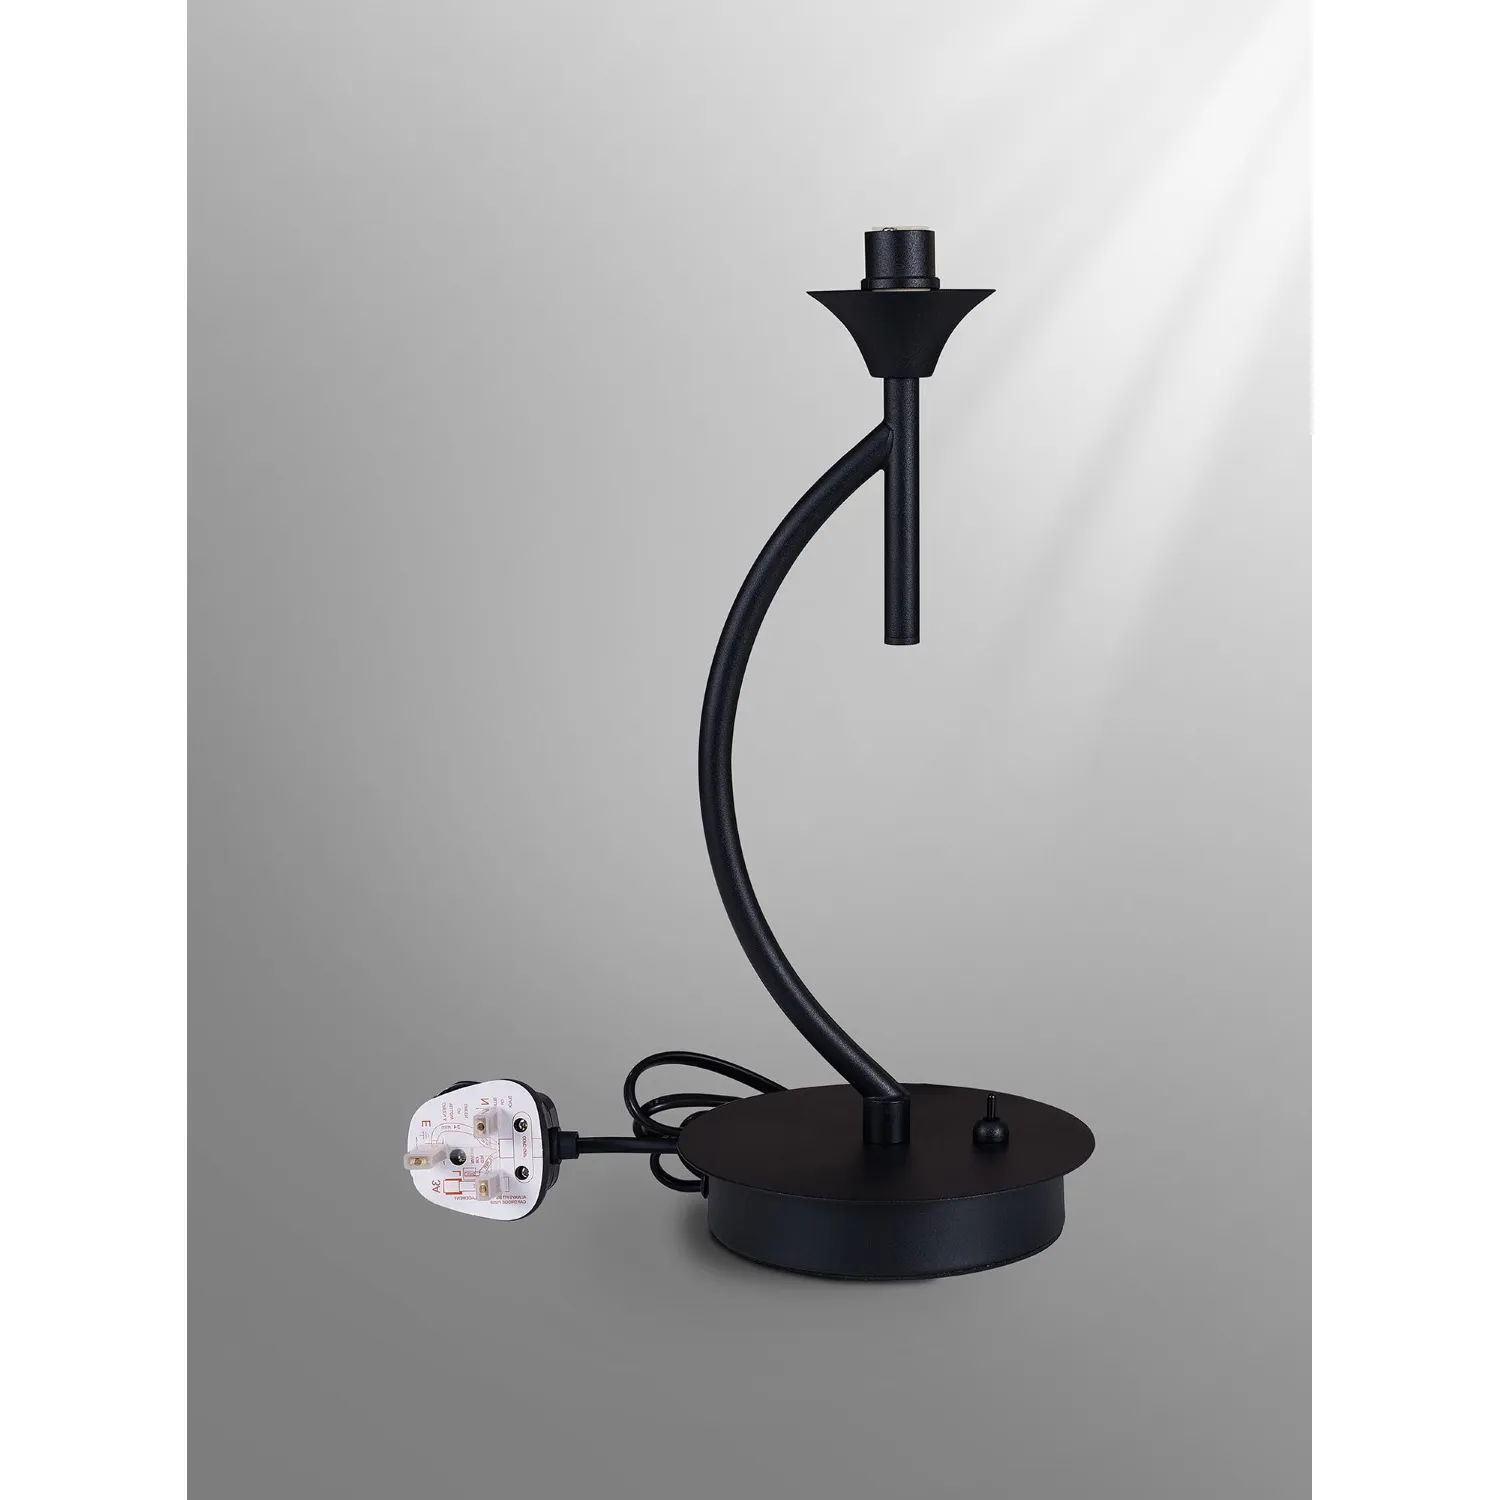 Abingdon Satin Black 1 Light G9 Vertical Table Lamp, Suitable For A Vast Selection Of Glass Shades